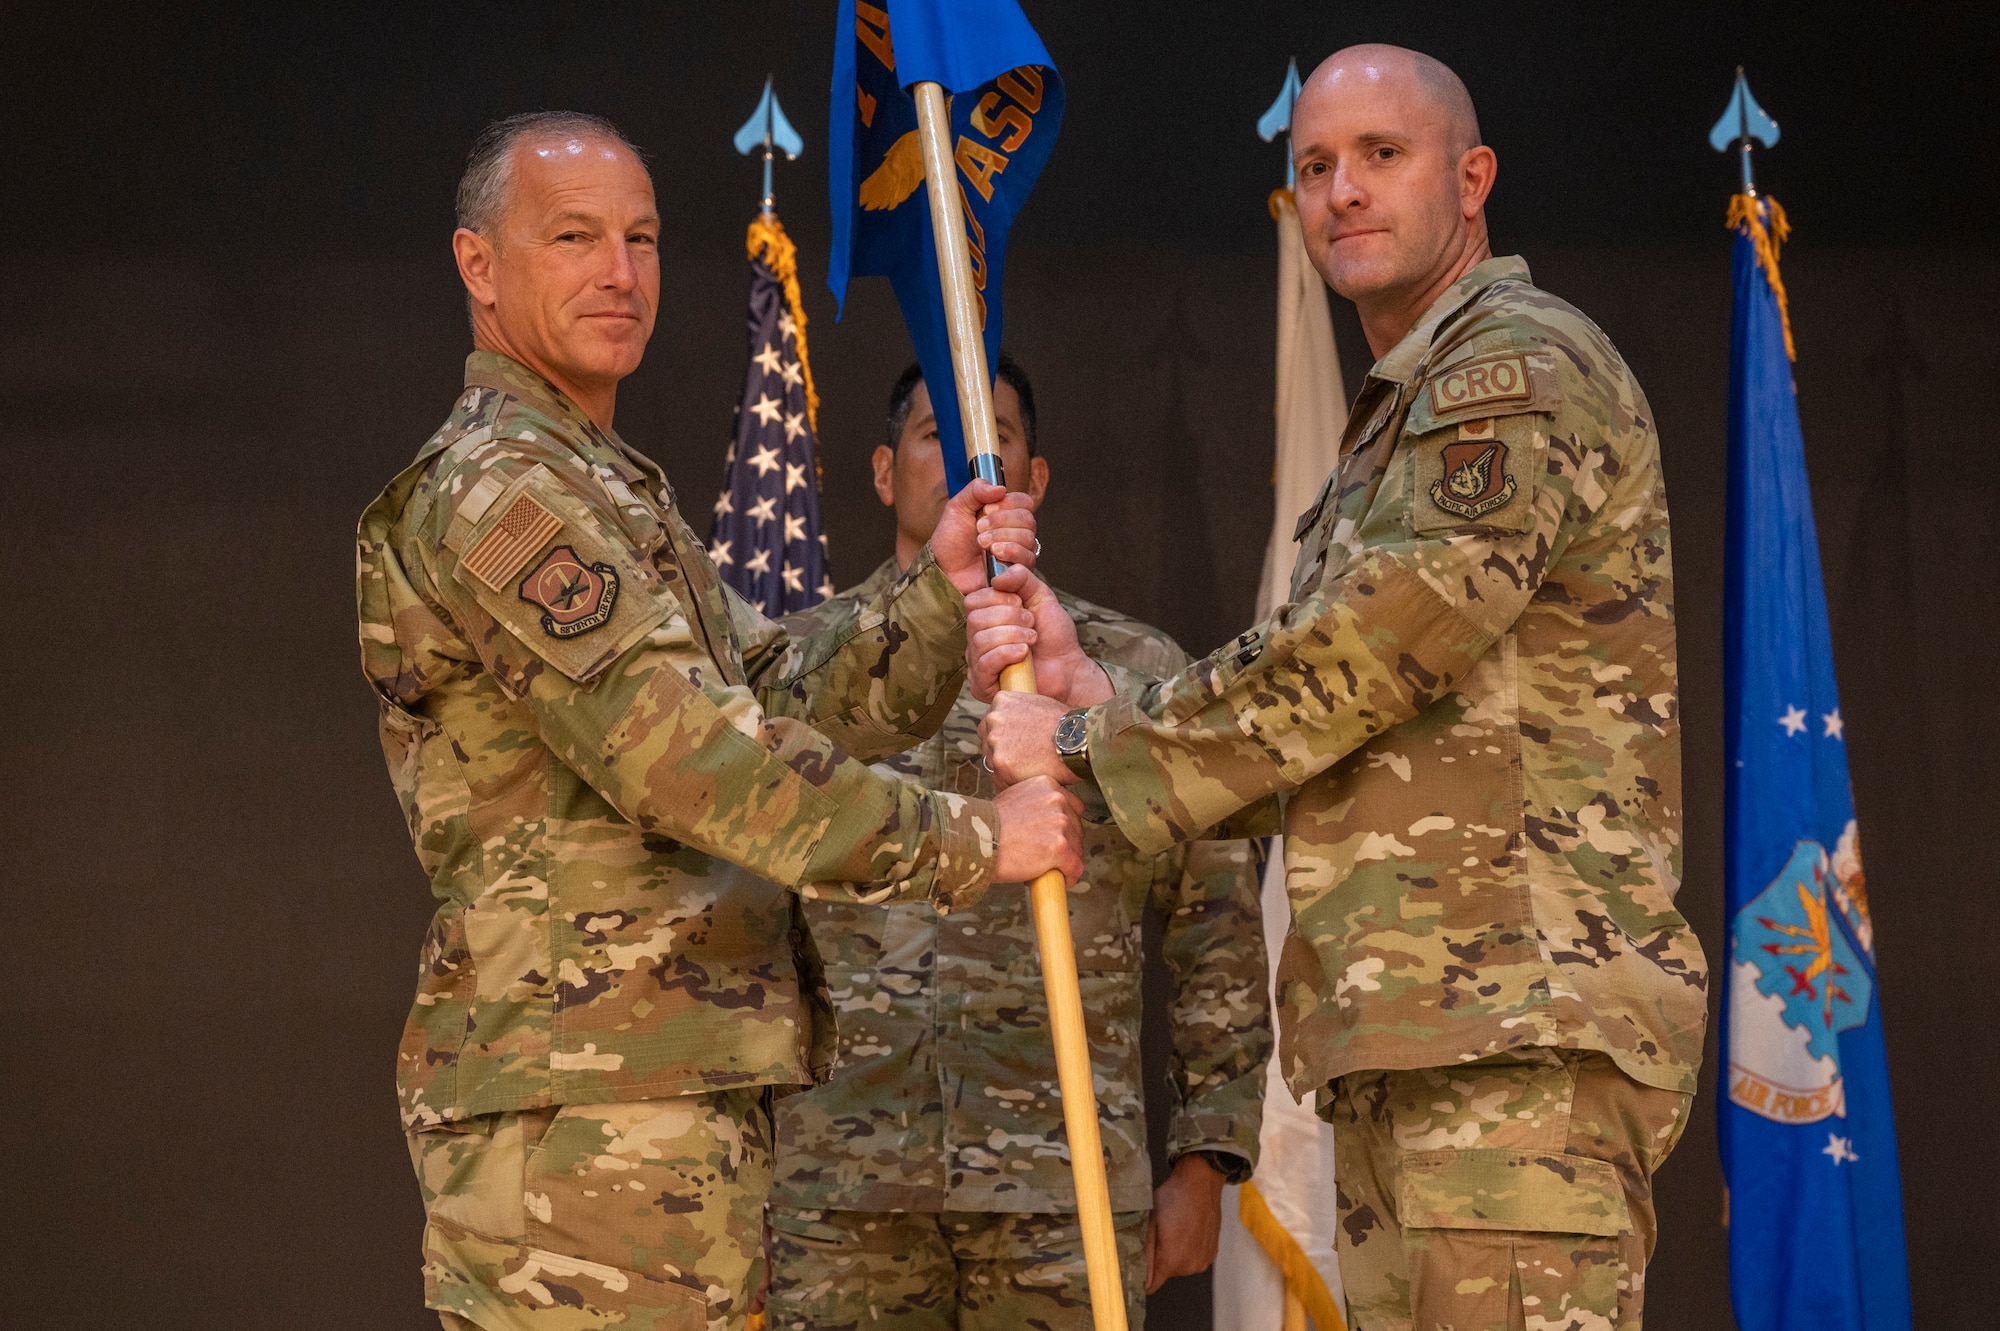 U.S. Air Force Lt. Gen. Scott Pleus, left, 7th Air Force commander, presents the guidon to Col. Patrick Lowe, 607th Air Support Operations Group incoming commander, as a symbol of his taking command  at Osan Air Base, Republic of Korea, June 26, 2023. Prior to taking command, Lowe served as chief, personnel recovery division for headquarters Air Combat Command at Joint Base Langley-Eustis, Virginia. (U.S. Air Force photo by Senior Airman Aaron Edwards)